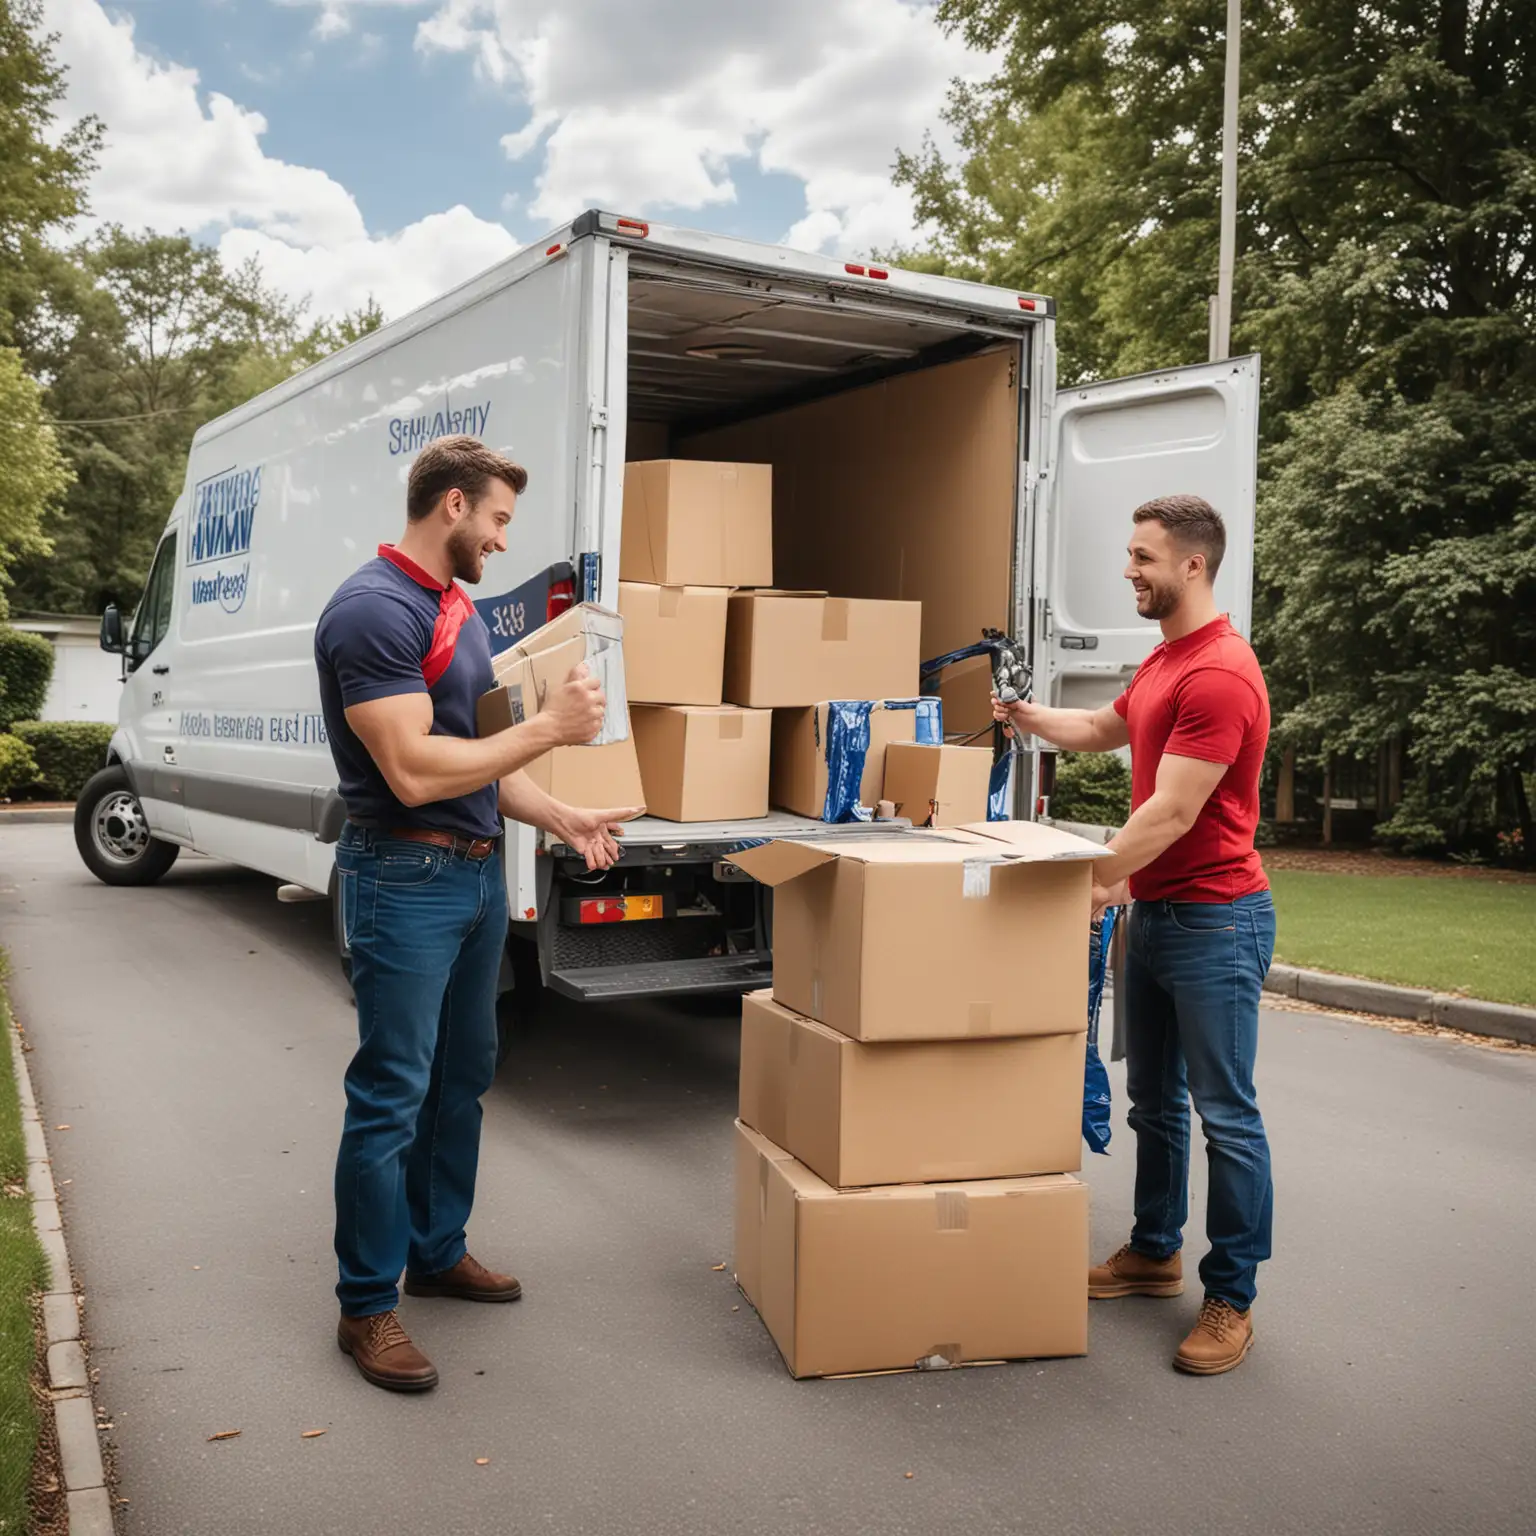 Professional Moving Company Efficiently Relocating Homes with Care